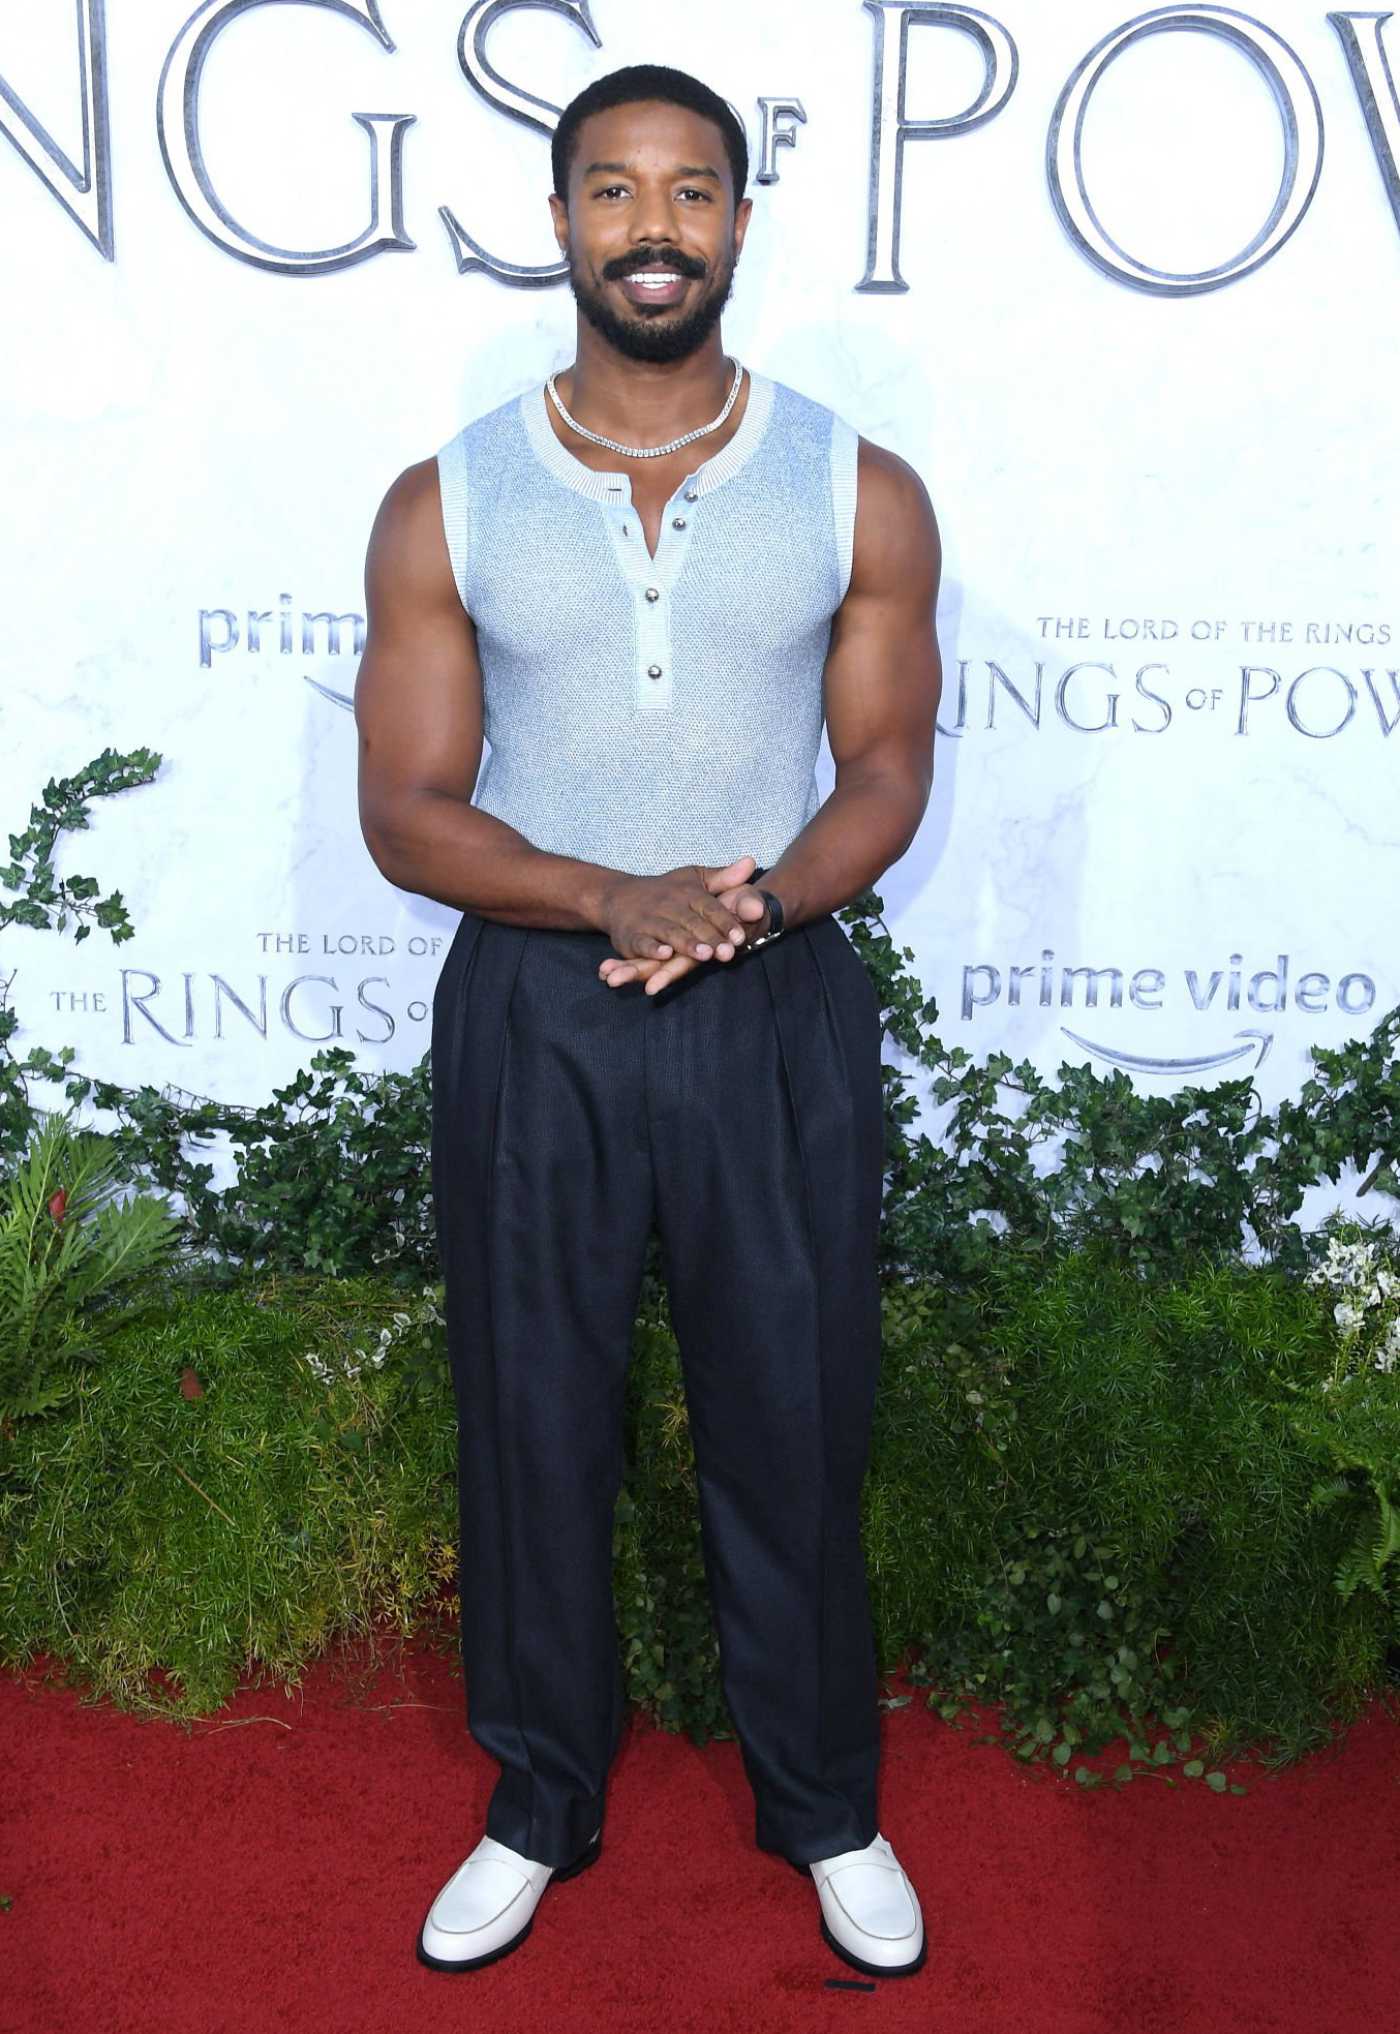 Michael B Jordan Attends The Lord of the Rings: The Rings of Power TV Series Premiere at Culver Studios in Los Angeles 08/15/2022